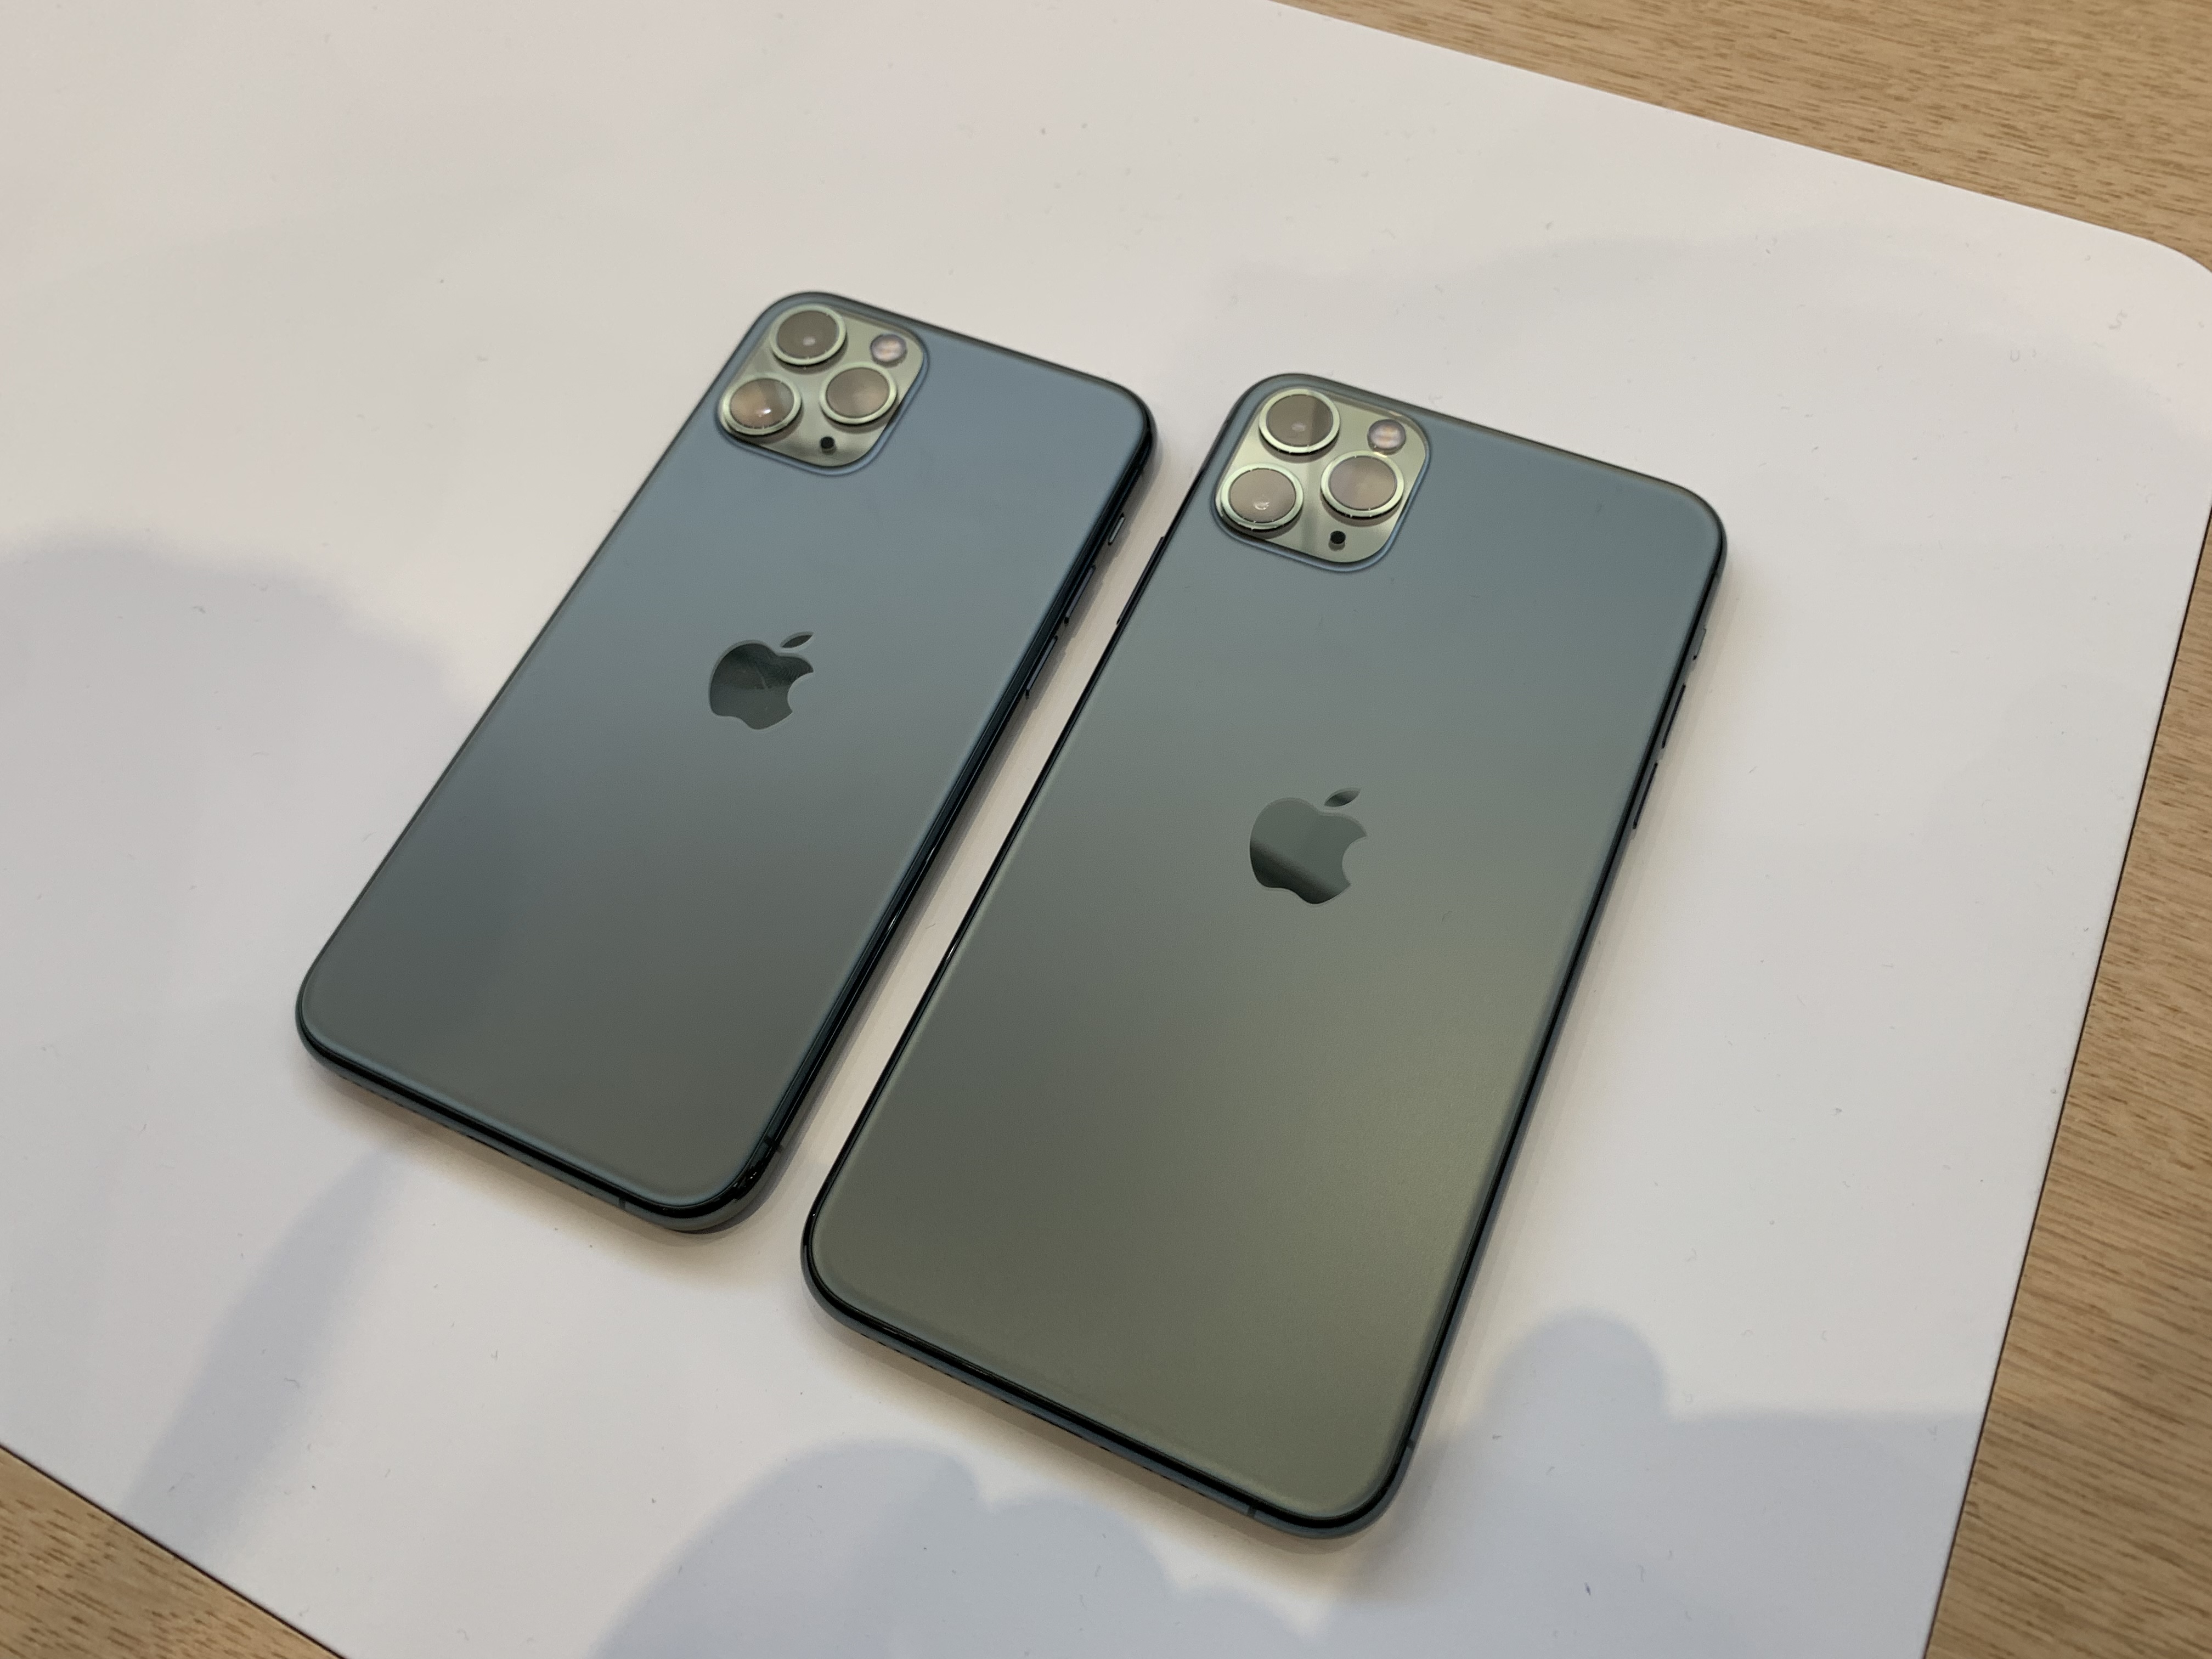 iPhone 11, iPhone 11 Pro, and iPhone 11 Pro Max: Hands-on with